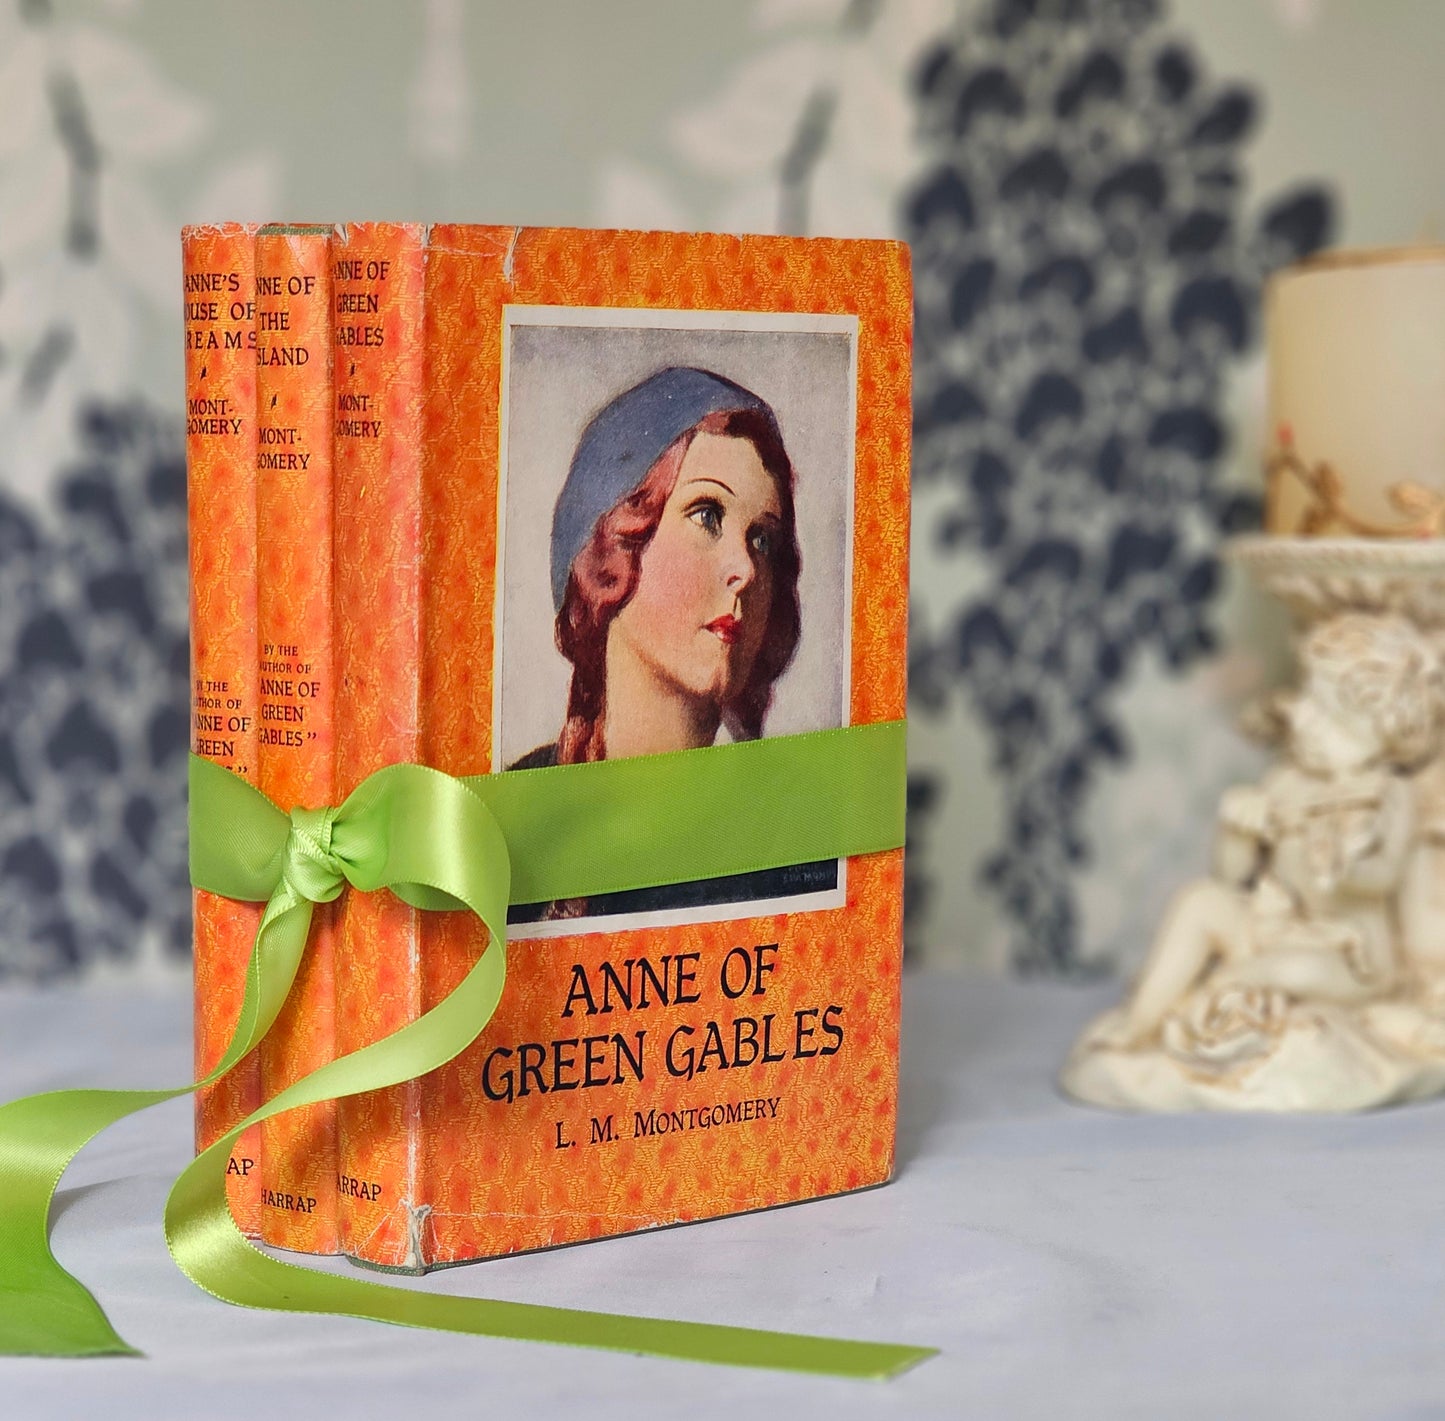 1946 Anne of Green Gables Set of Three Vintage Novels / LM Montgomery / George Harrap & Co., London / In Bright, Clean Vintage Condition